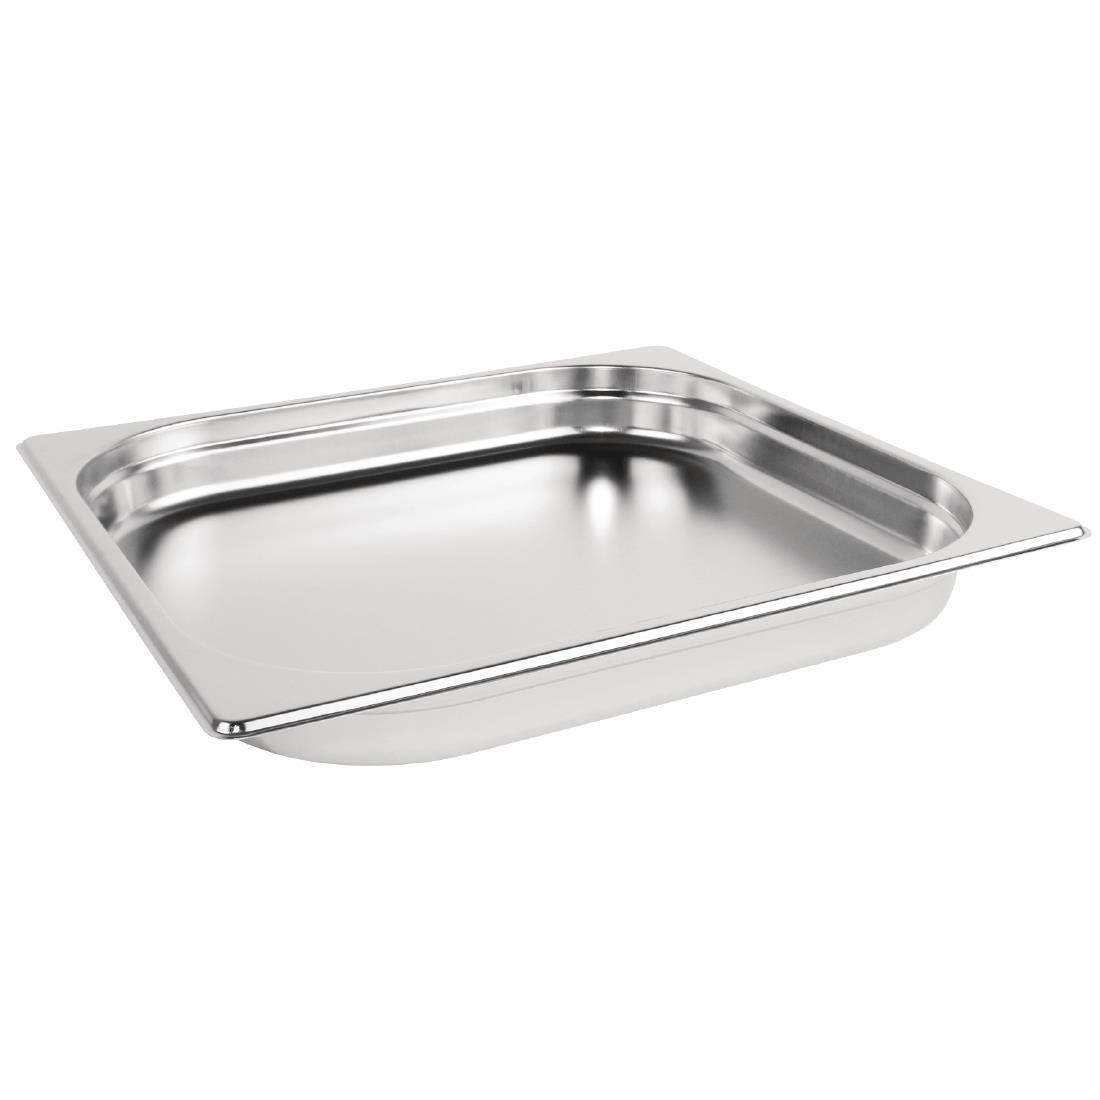 Vogue Stainless Steel 2/3 Gastronorm Pan 40mm - K810  - 1